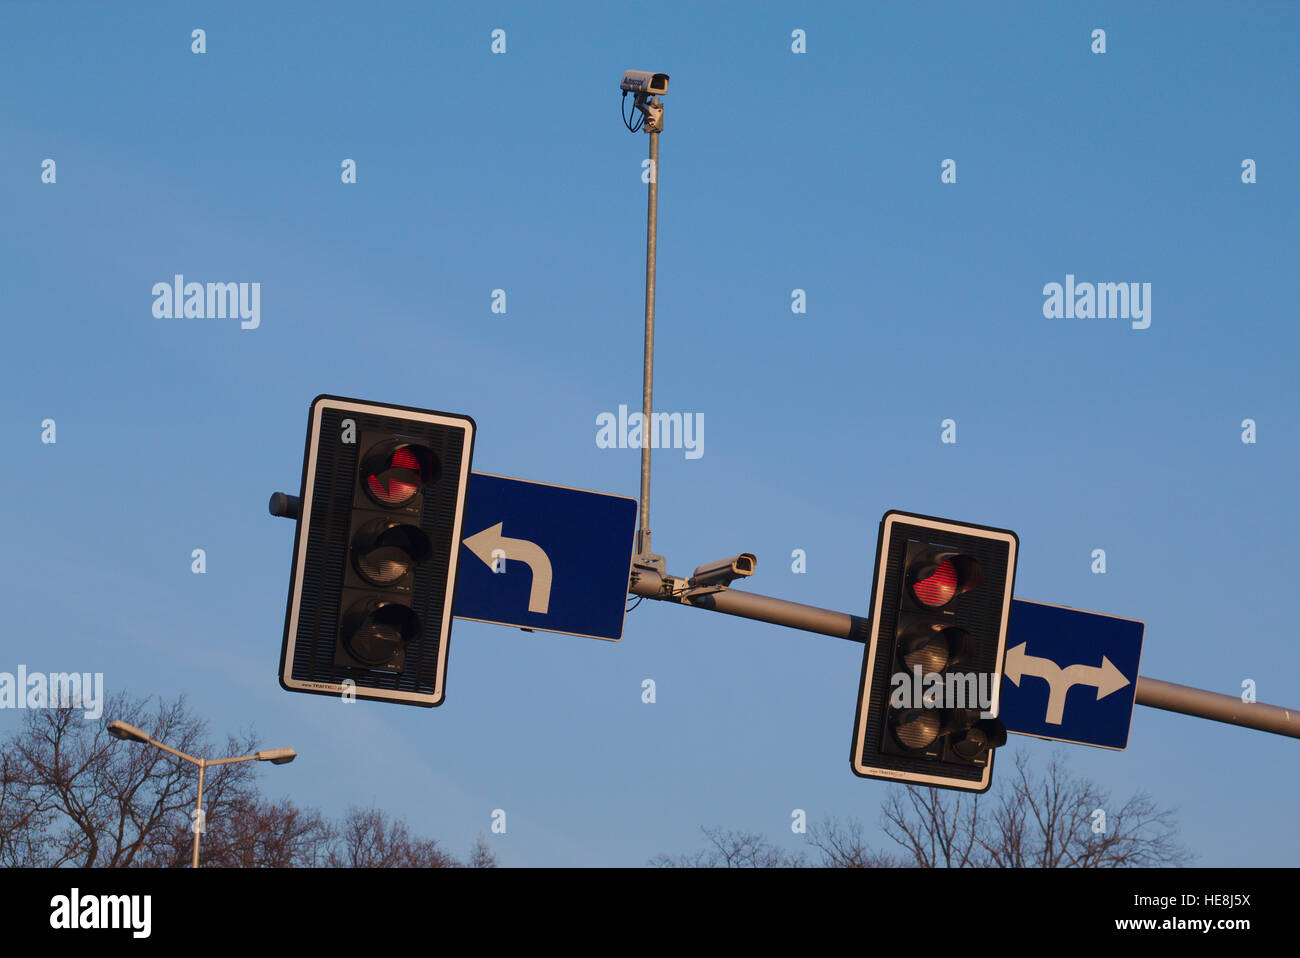 CCTV cameras as a part of 'intelligent transportation system' installed in Wroclaw, Poland Stock Photo